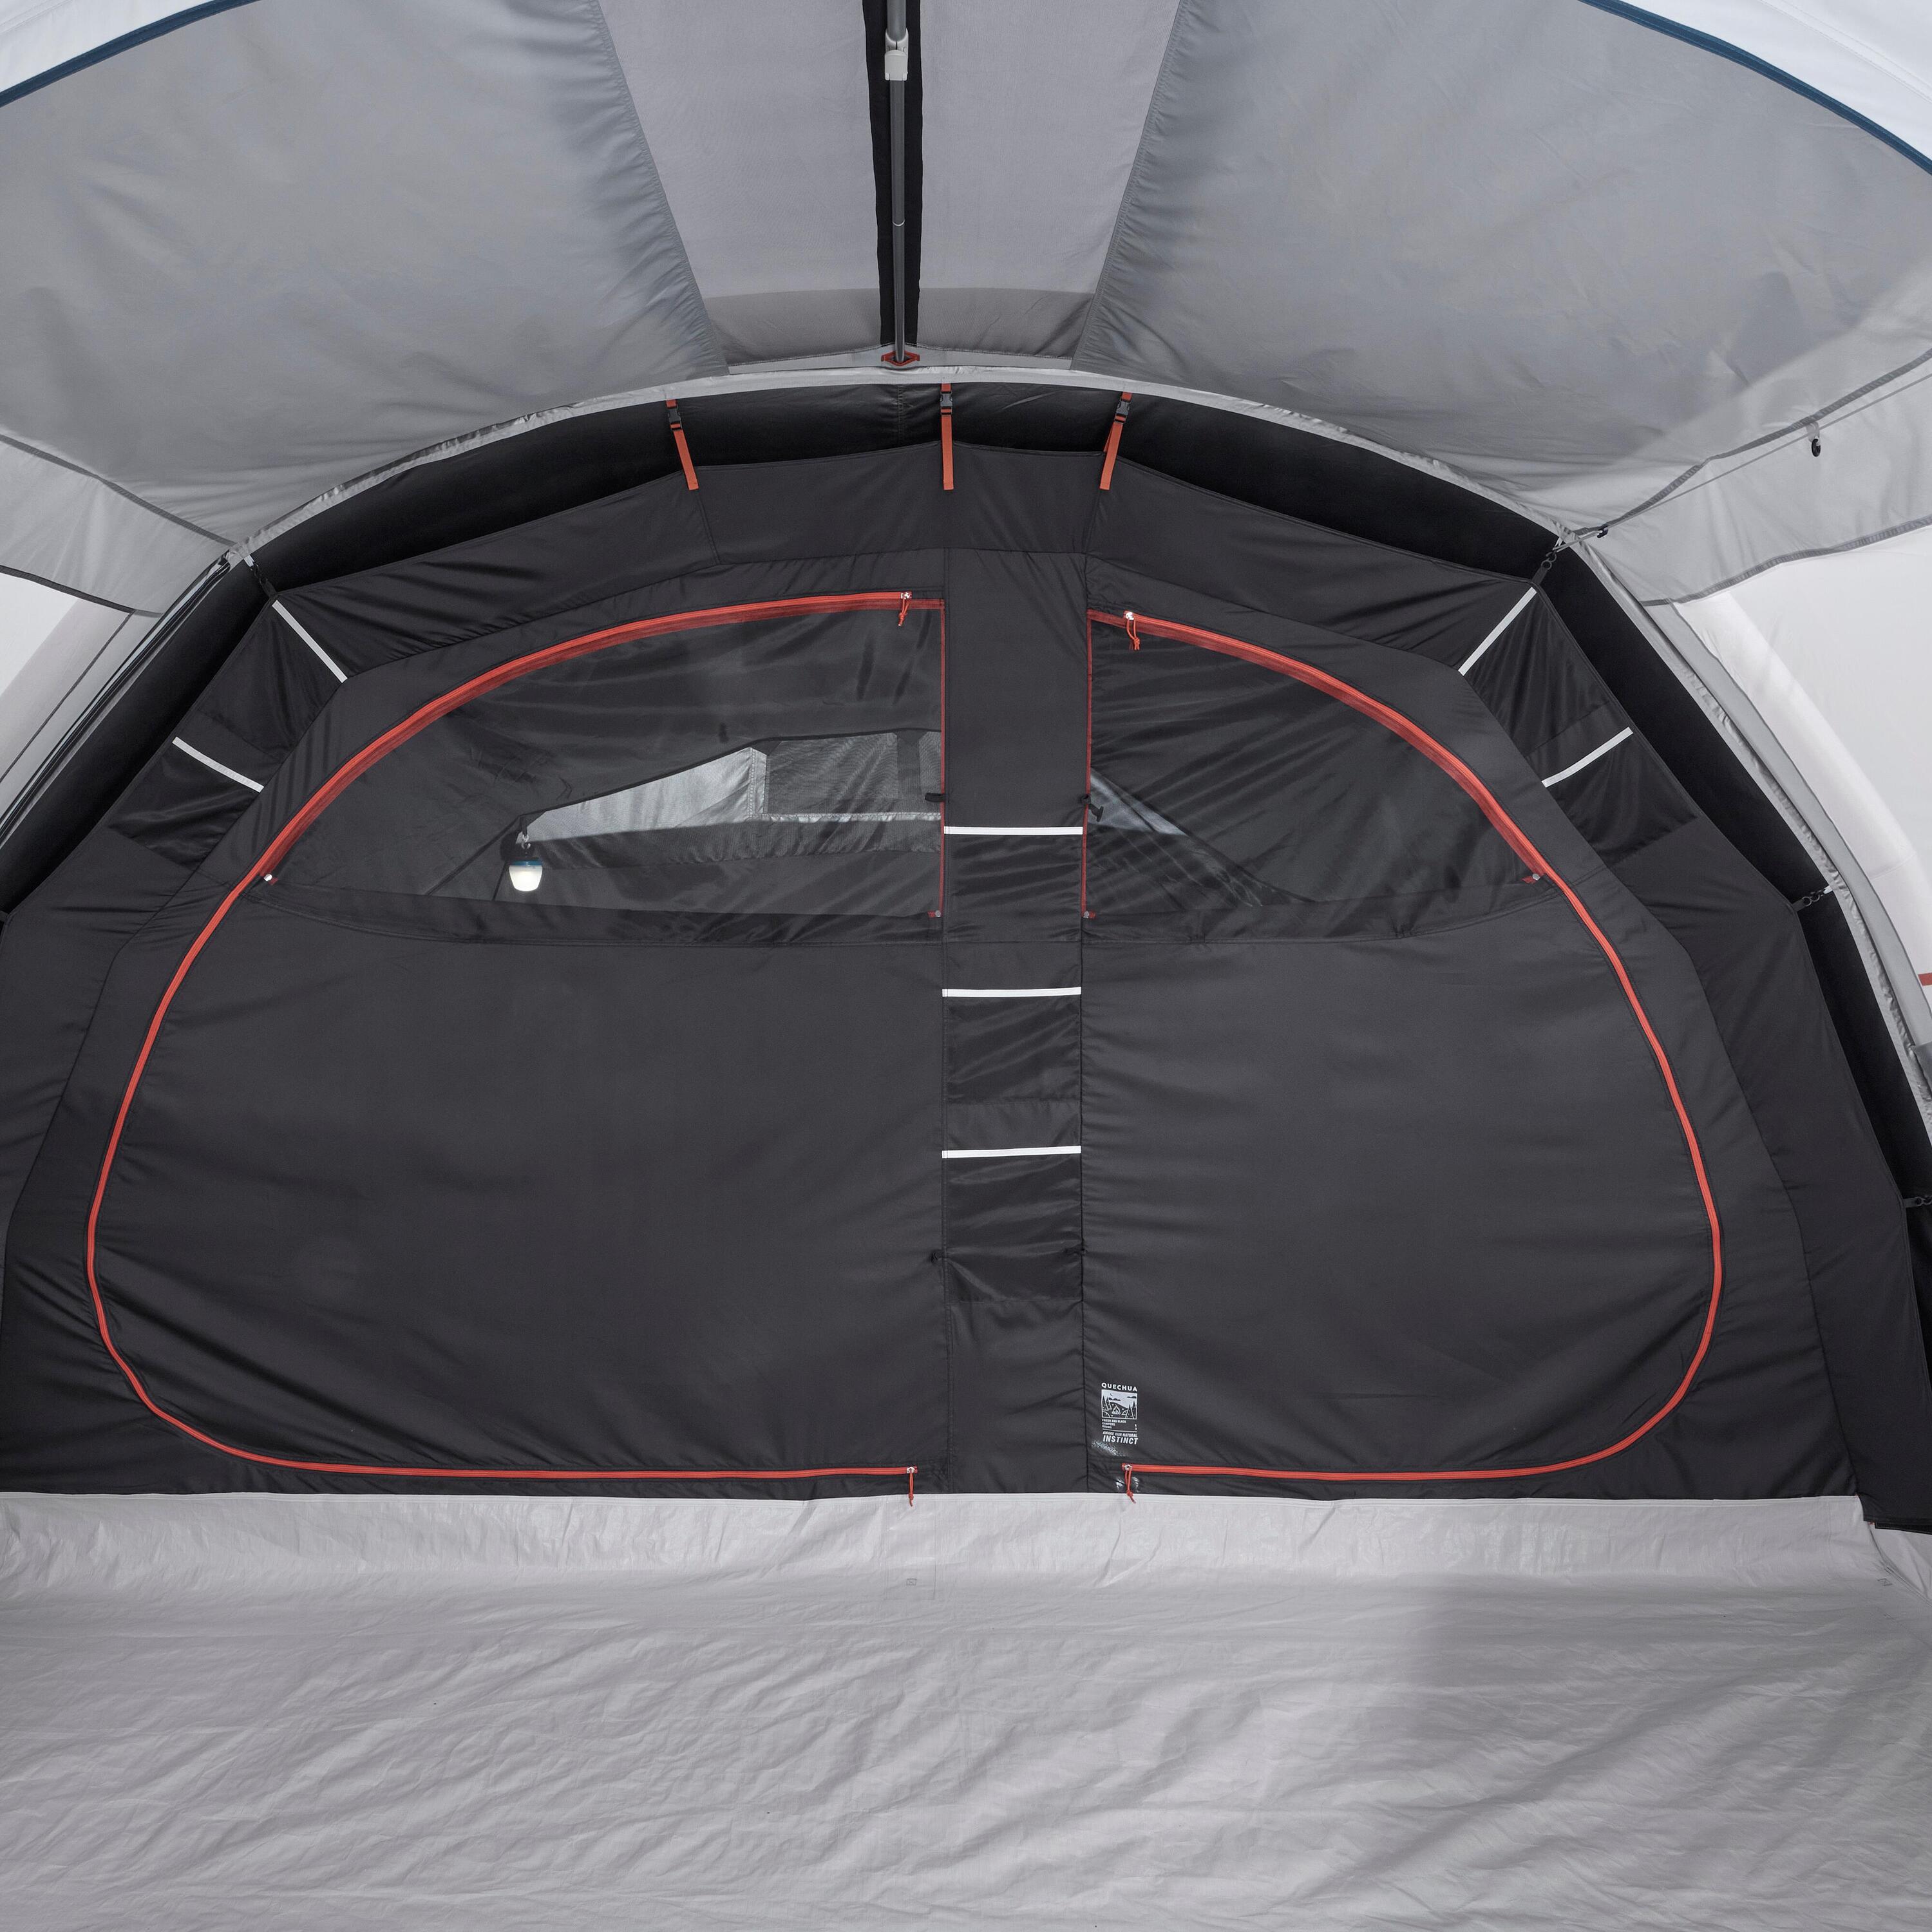 BEDROOM AND GROUNDSHEET - ARPENAz 5.2 Fresh&Black Tent Spare Part 4/4